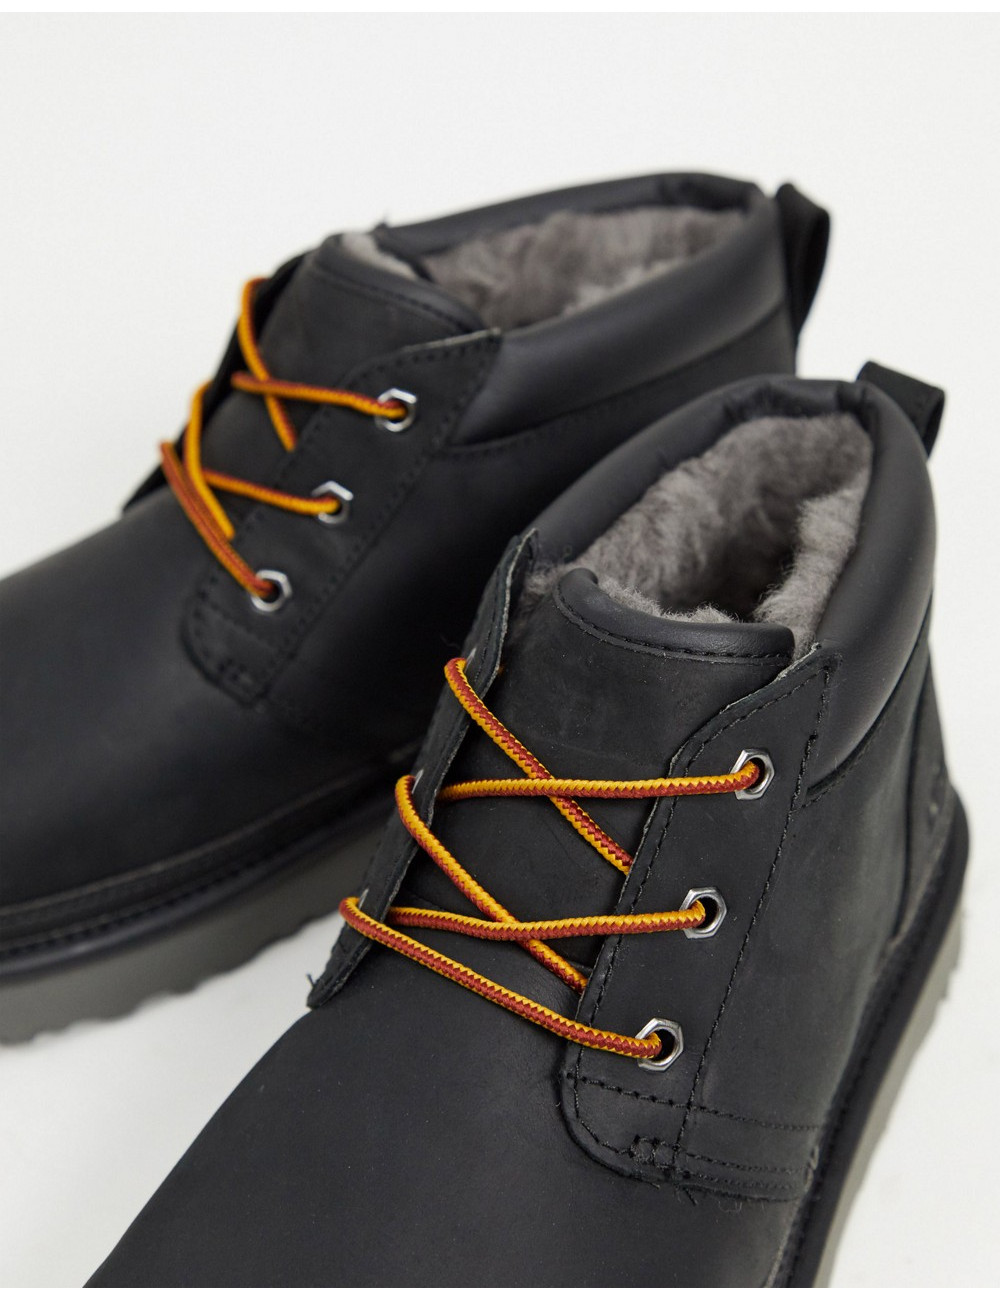 UGG neumel utility boots in...